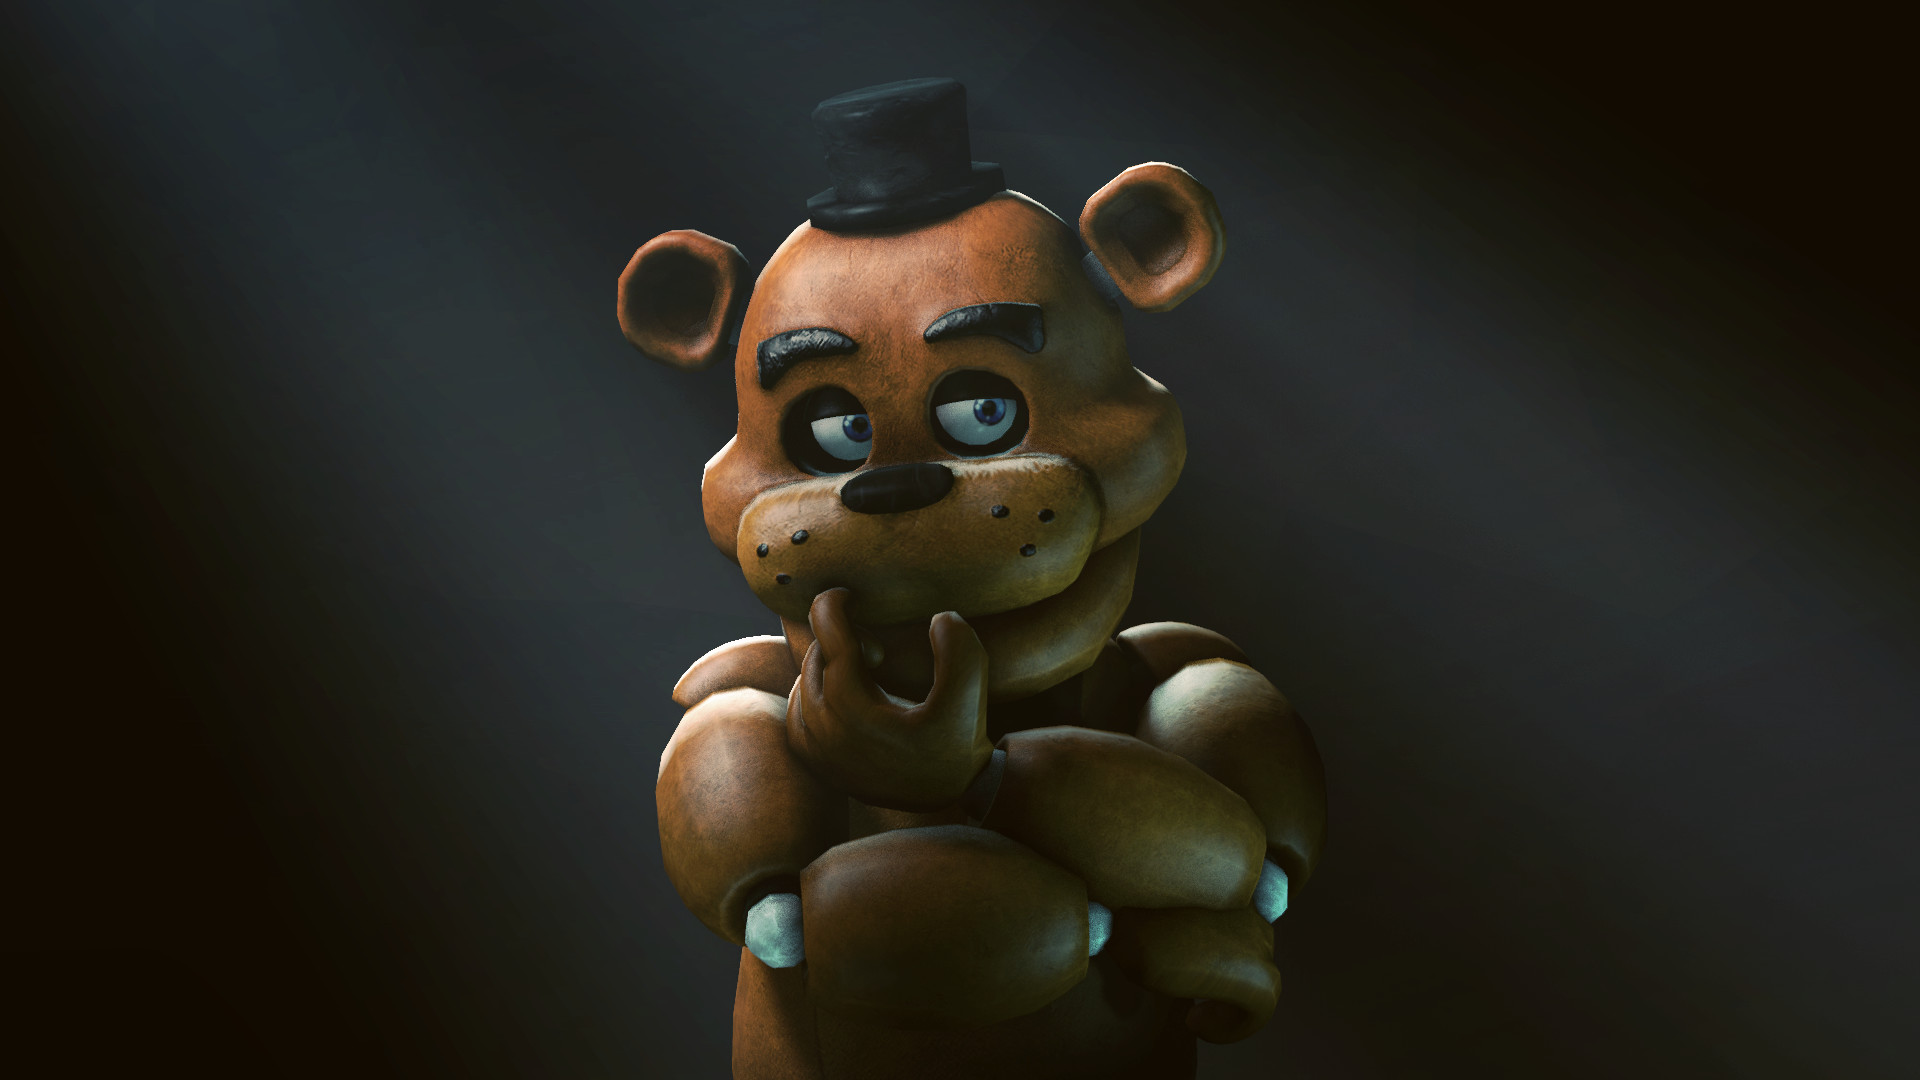 1920x1080 170 best five nights at freddy's images on Pinterest | Freddy s, Freddy  fazbear and Image